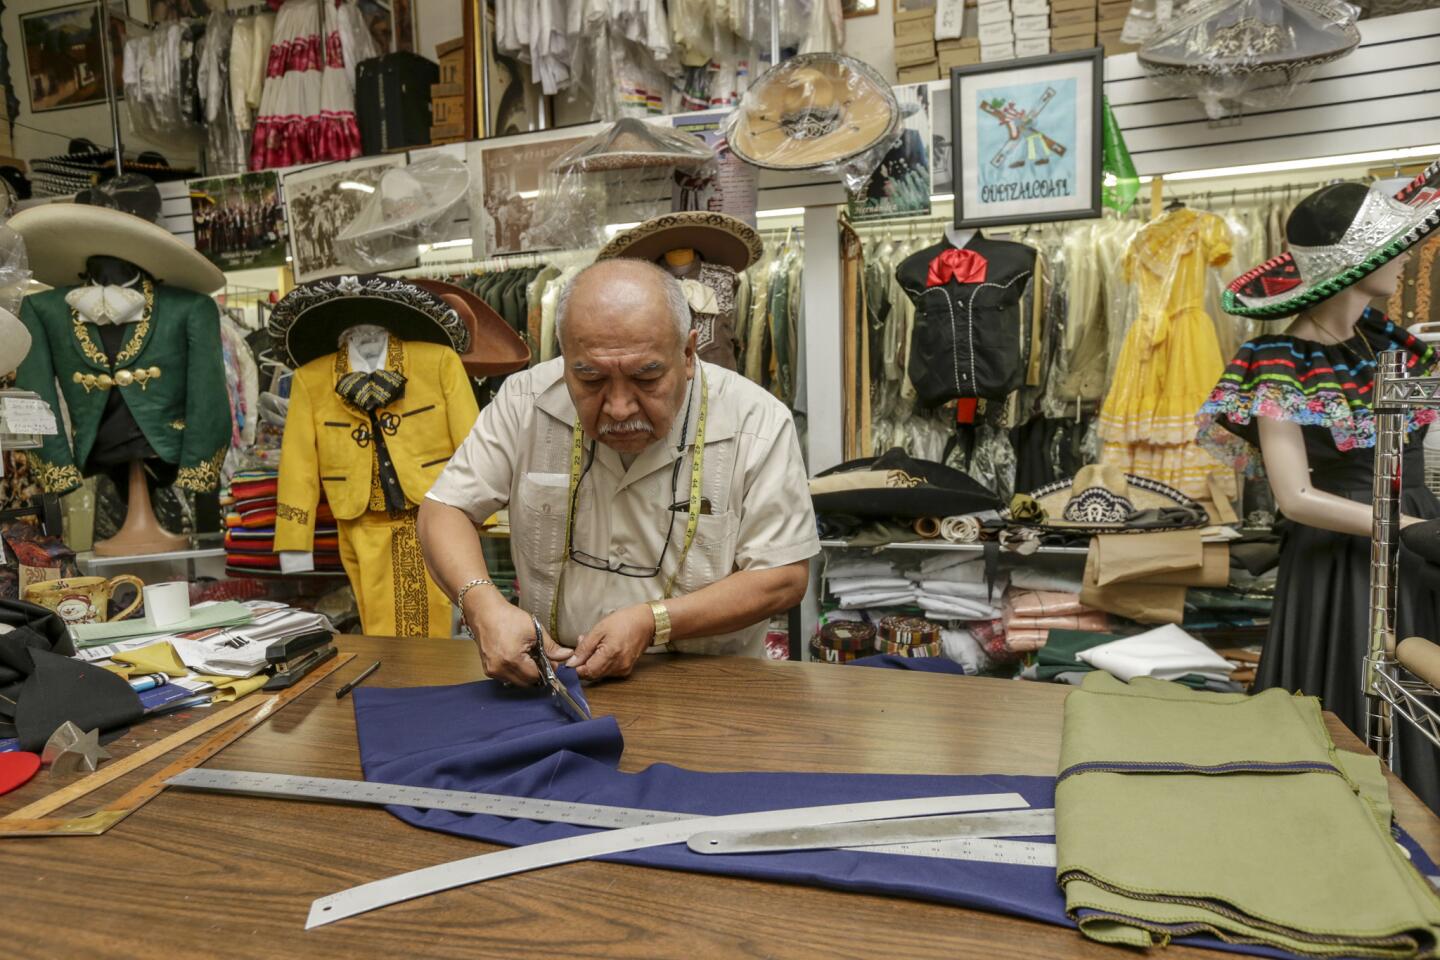 Jorge Tello, 62, said last night he was happy, thinking that Hillary Clinton would win the presidency. This morning, he woke up sad, worried about how a Donald Trump presidency would affect immigrants like him. Tello has owned a mariachi uniform tailoring shop in Boyle Heights for the last 30 years.